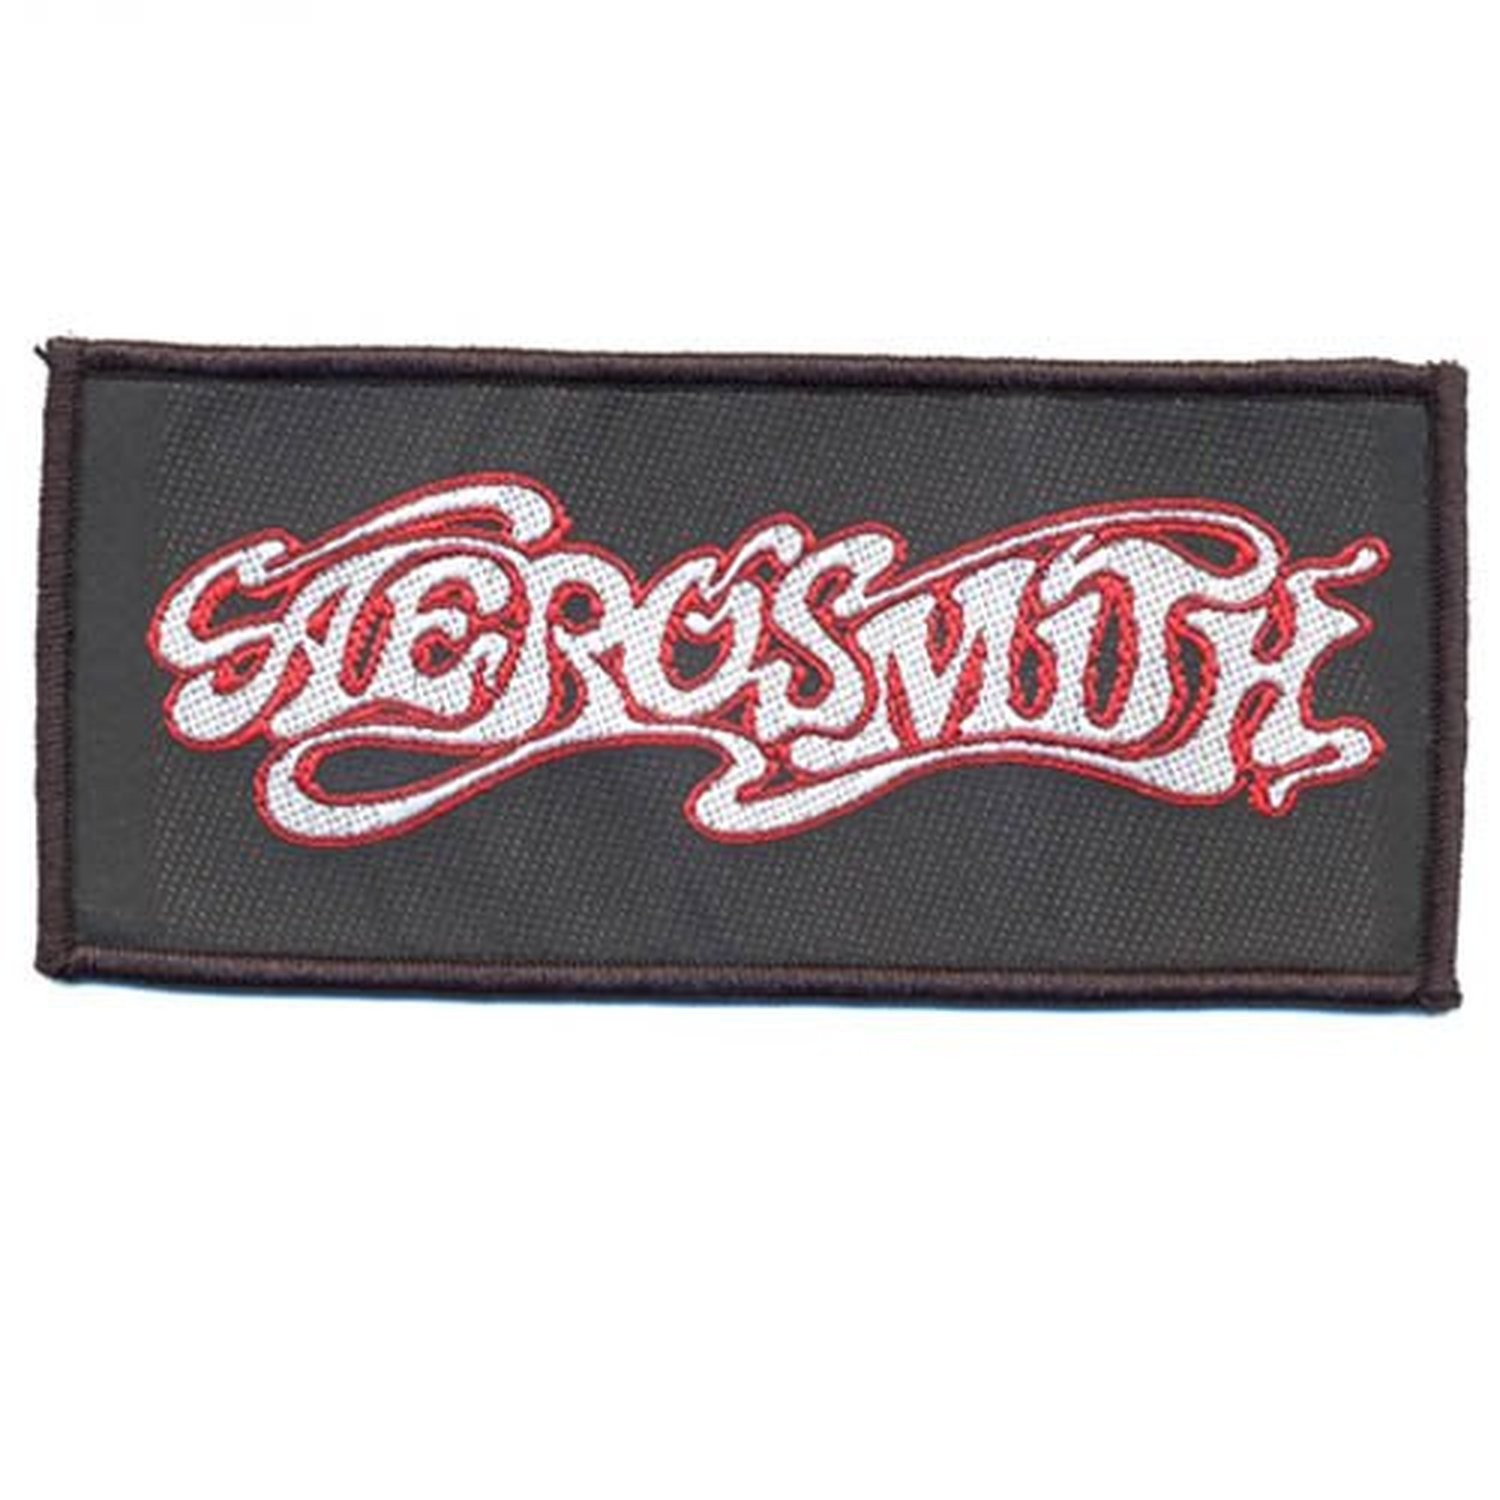 Aerosmith Woven Band Logo Sew Iron On Clothing Patch Jumper Bag Official Badge